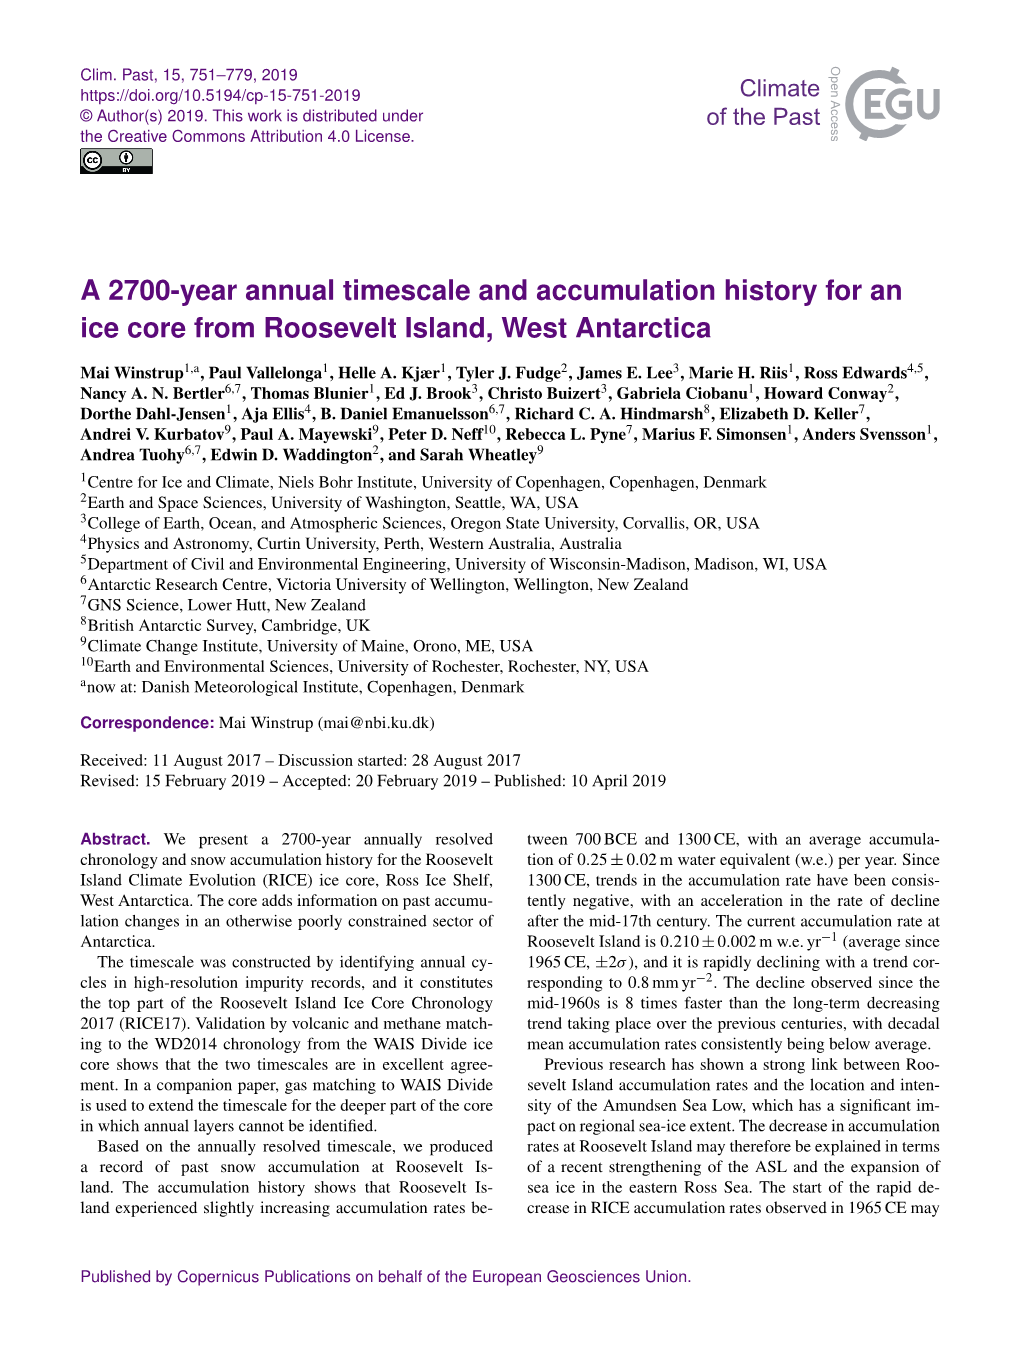 A 2700-Year Annual Timescale and Accumulation History for an Ice Core from Roosevelt Island, West Antarctica